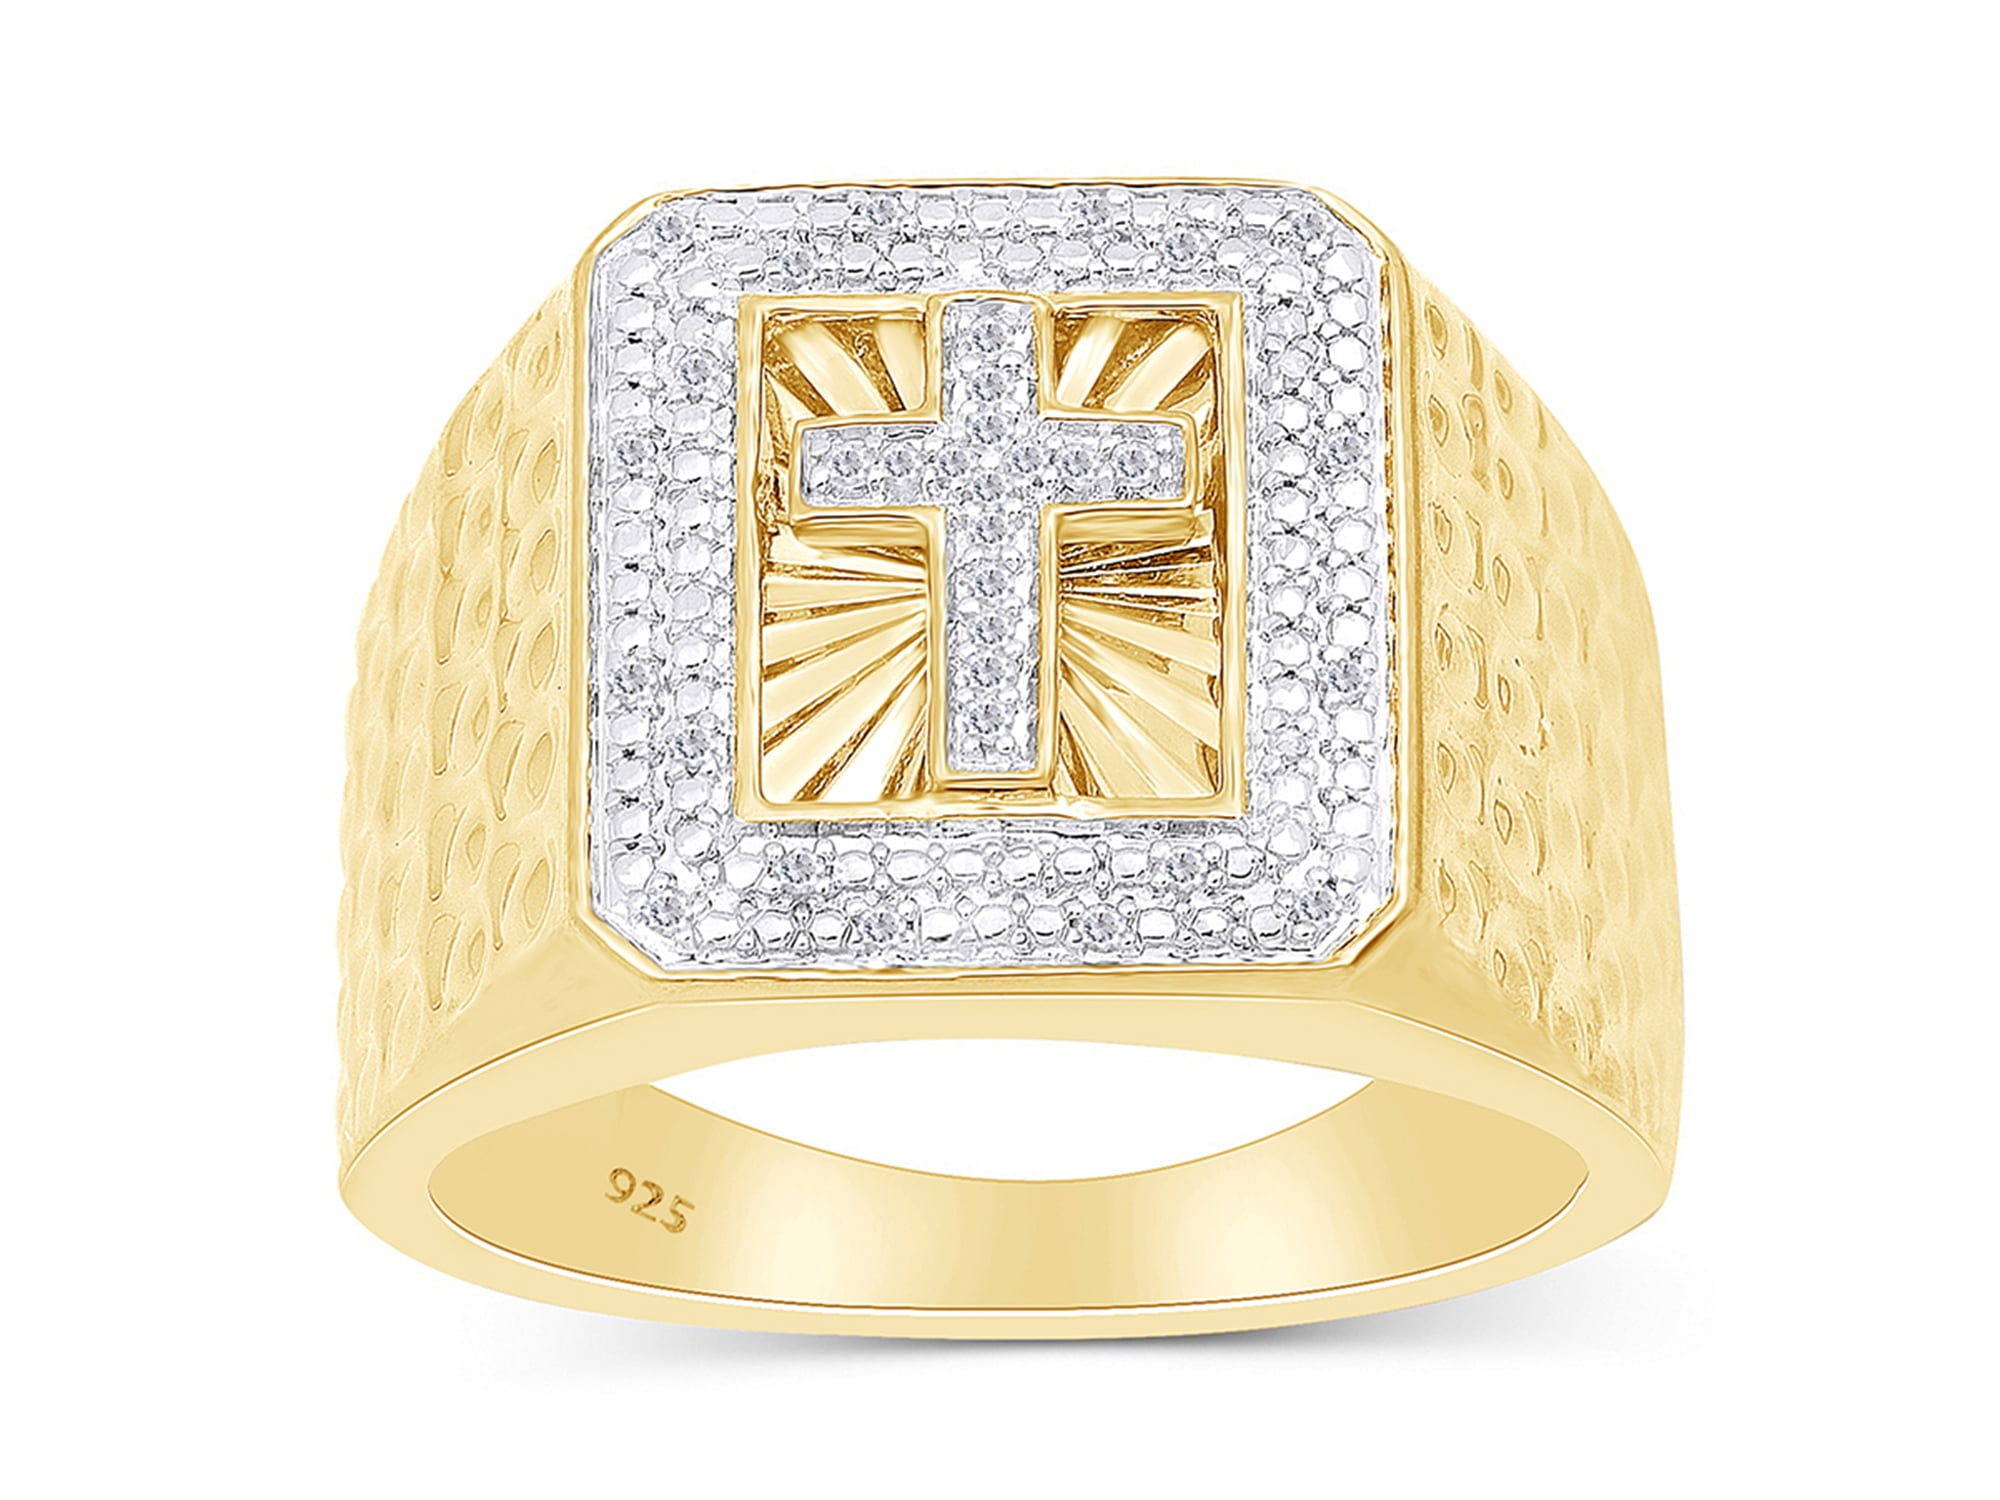 9ct gold vs 18ct gold: What's the difference? [And which is better?]